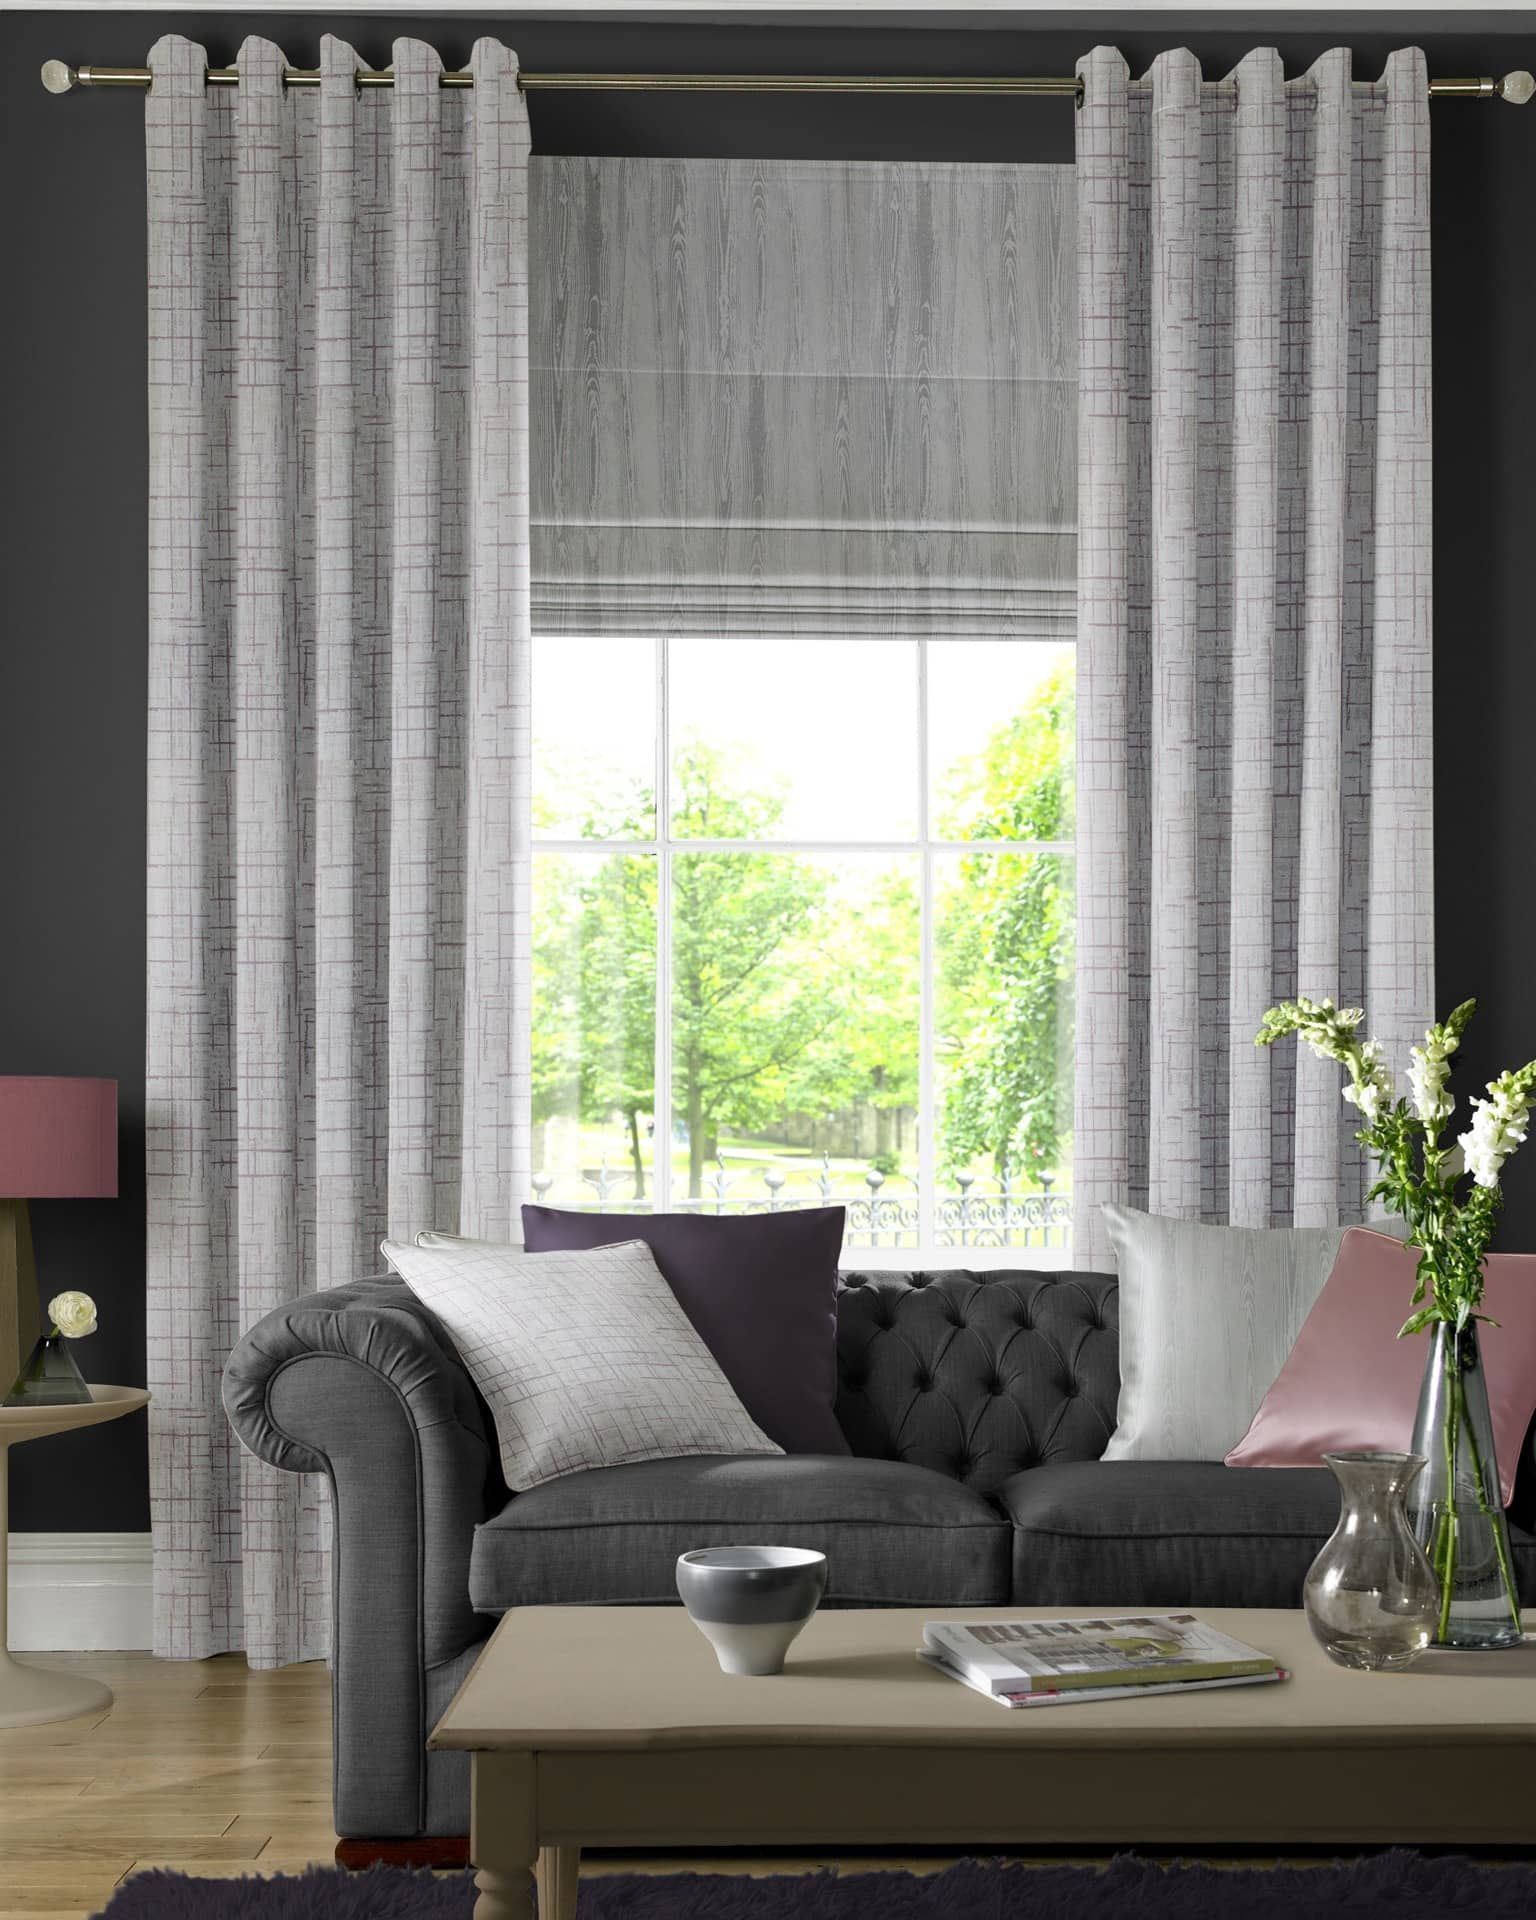 Curtains and Roman Blinds for a sitting room window